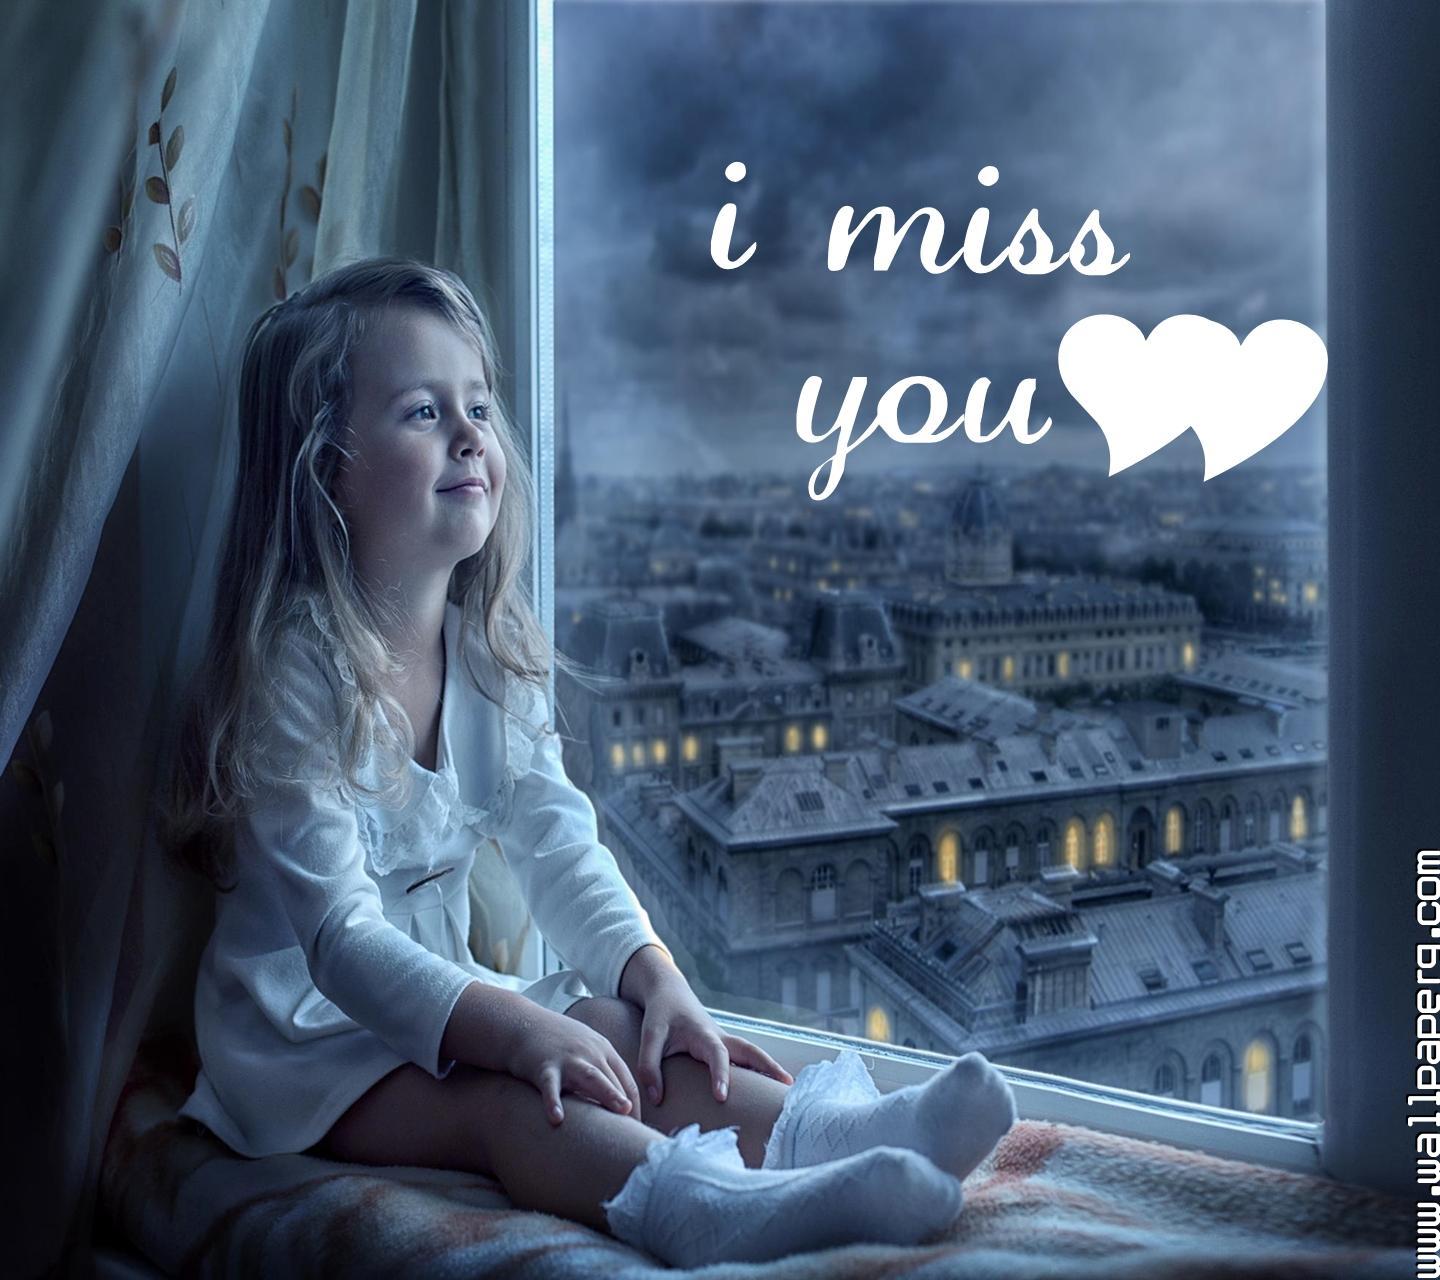 Download I miss you(2) - Miss you hd wallpapers for your mobile cell phone